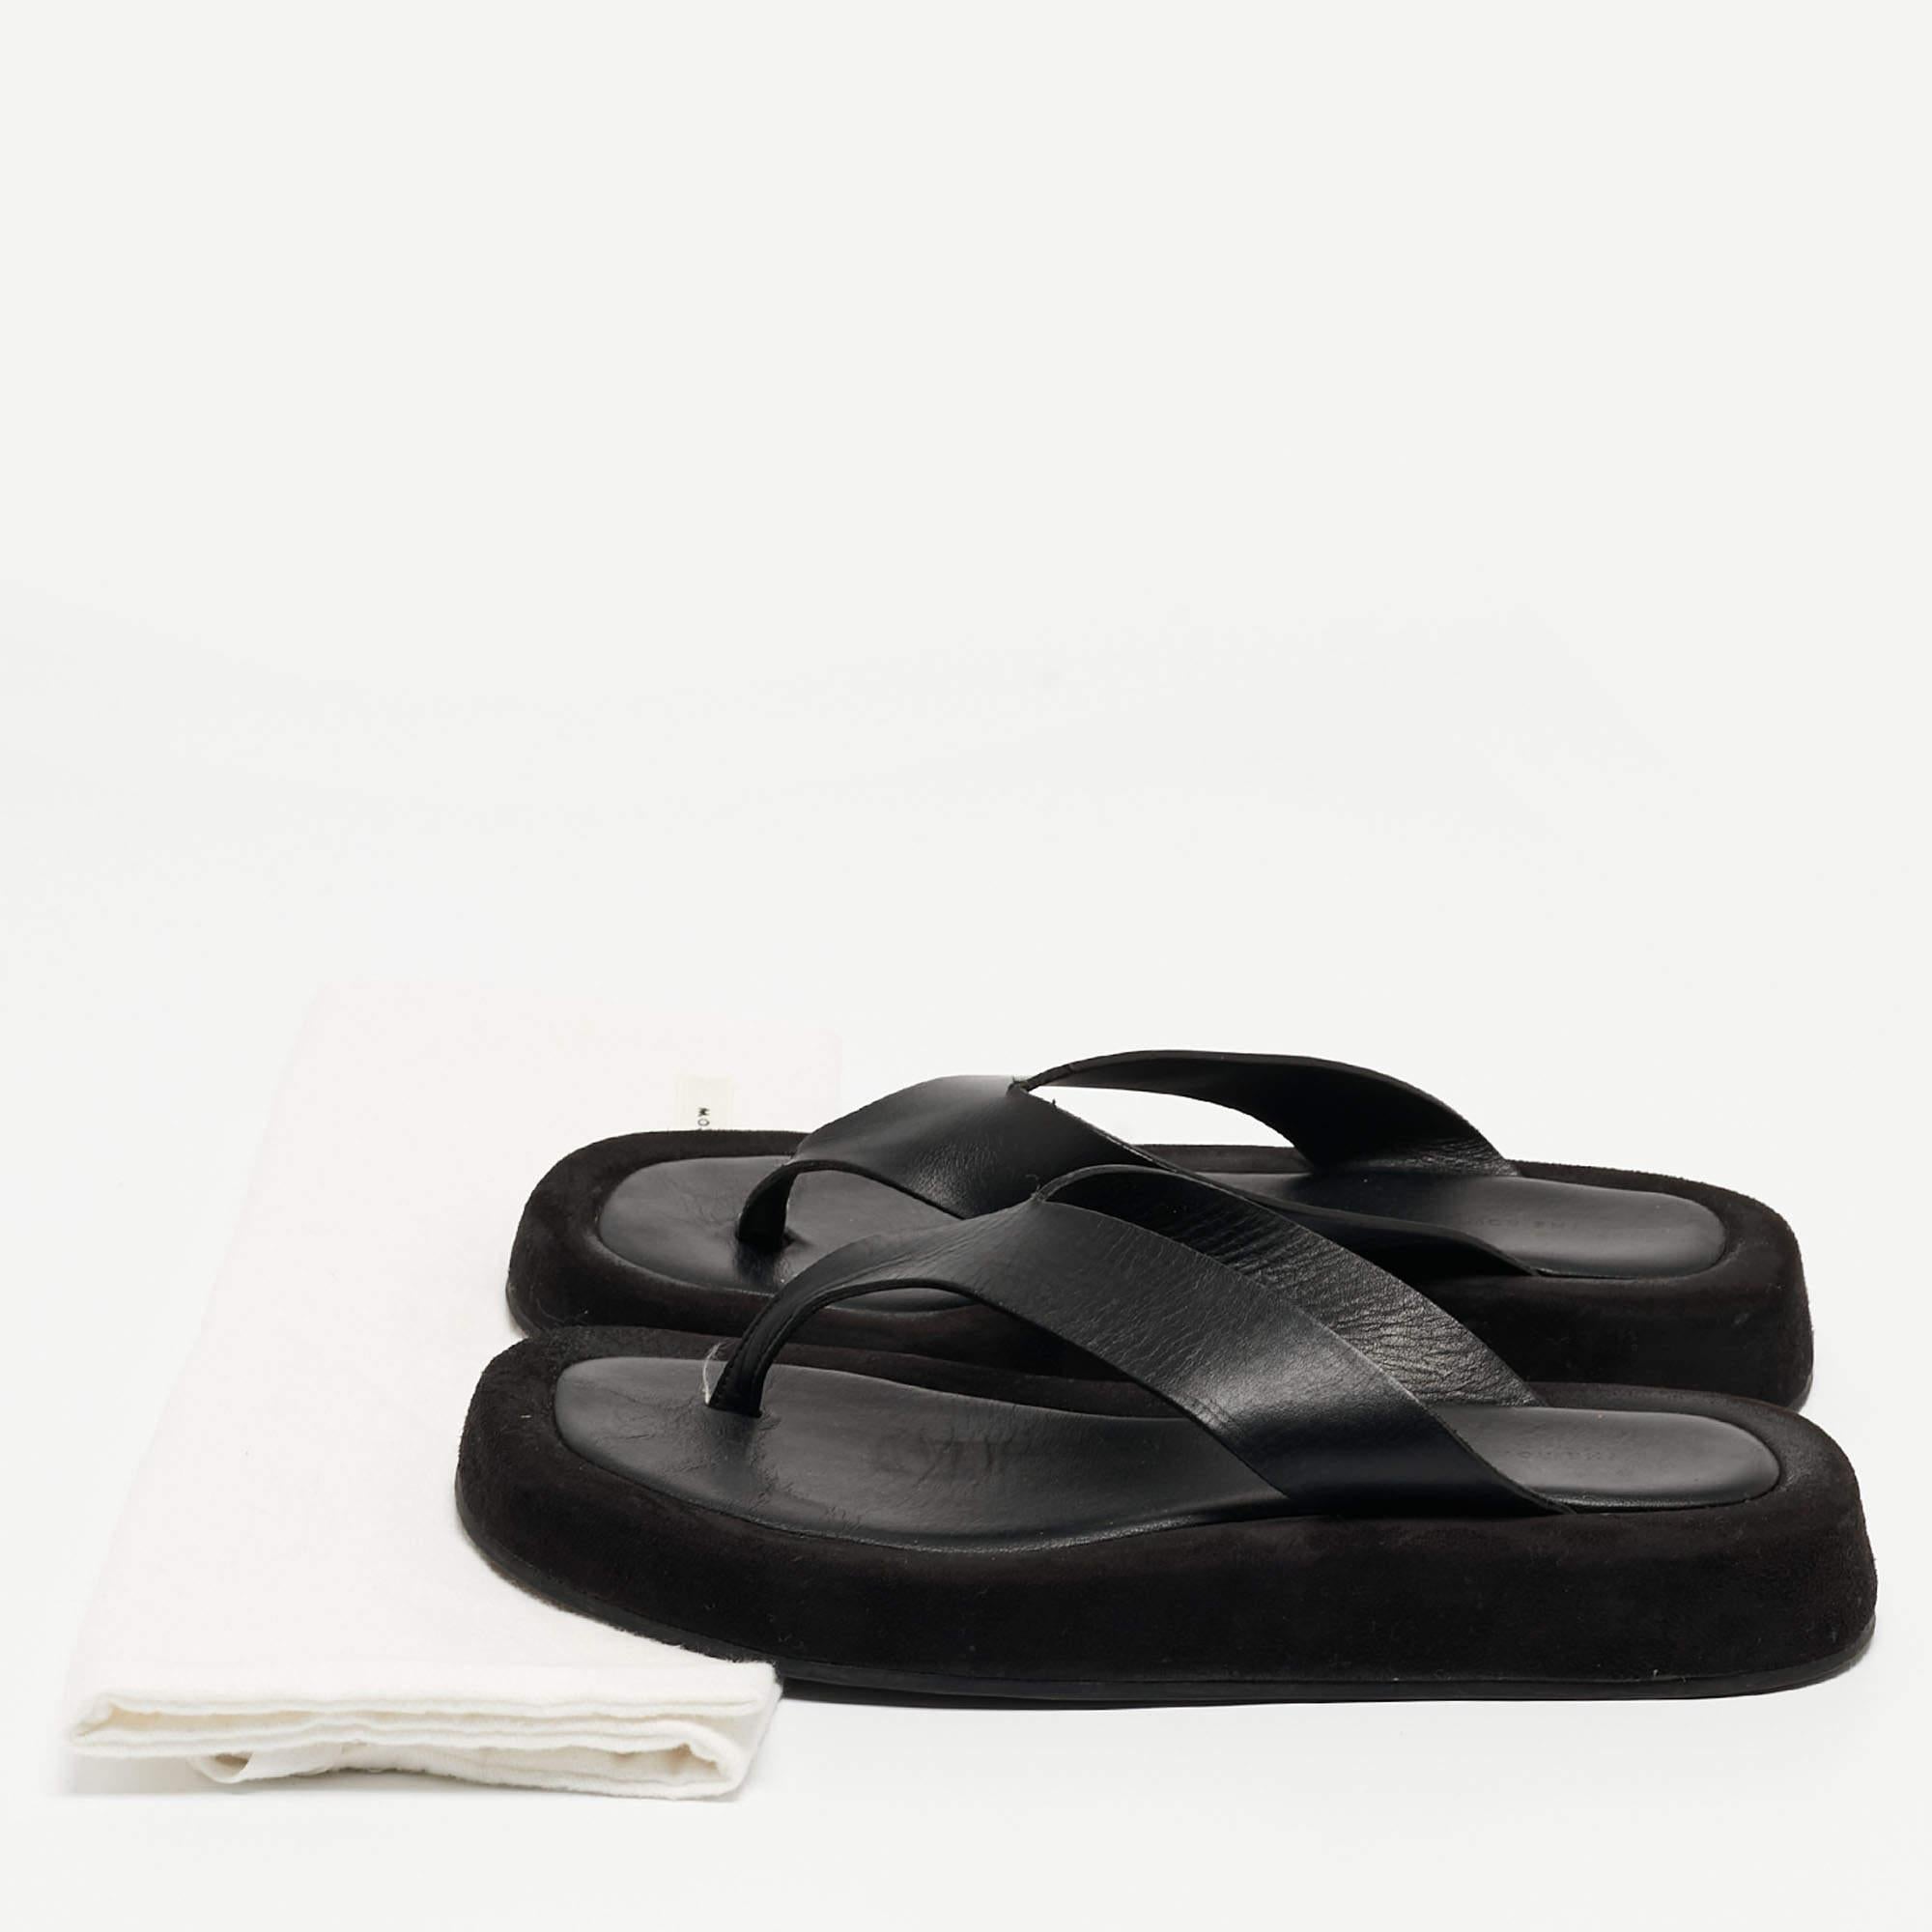 The Row Black Leather Thong Flat Slides Size 37 5